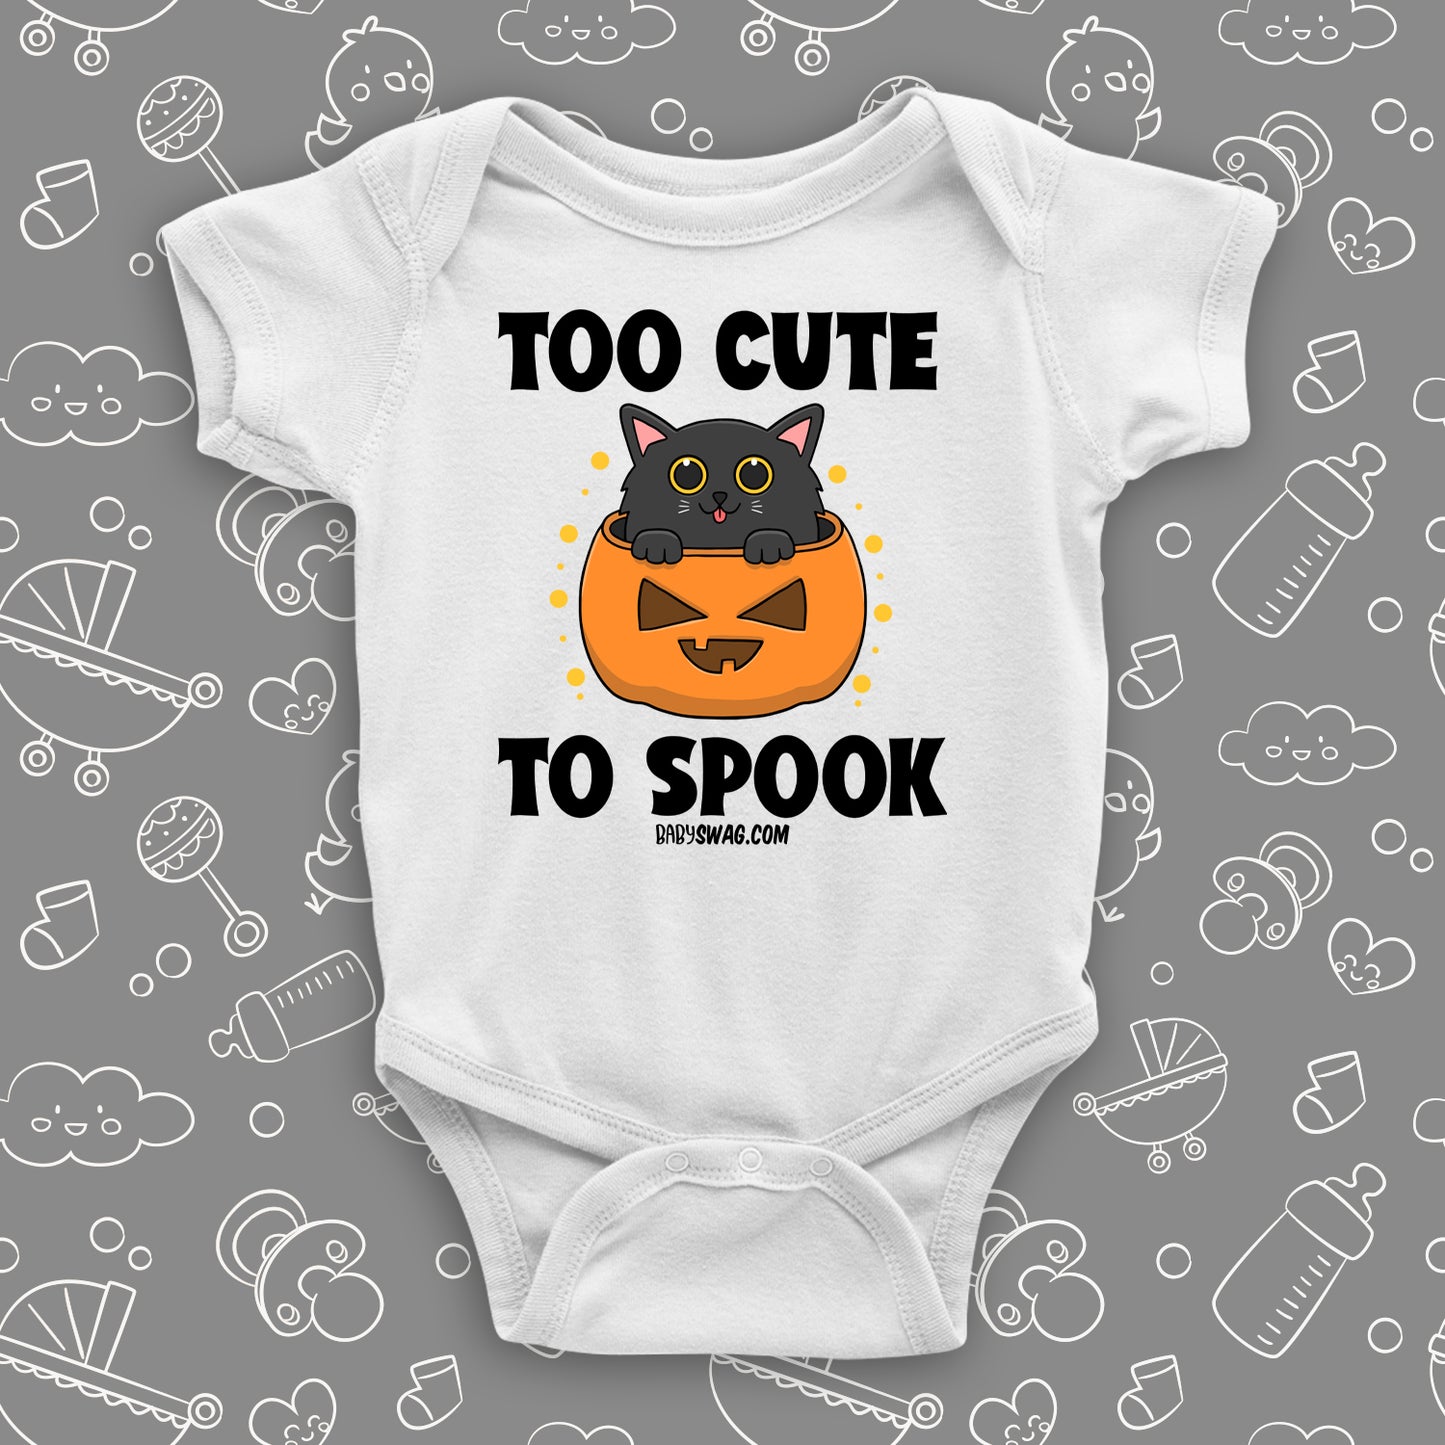 White cute baby onesie saying "Too Cute To Spook" with an image of a kitten coming out of the Halloween pumpkin.